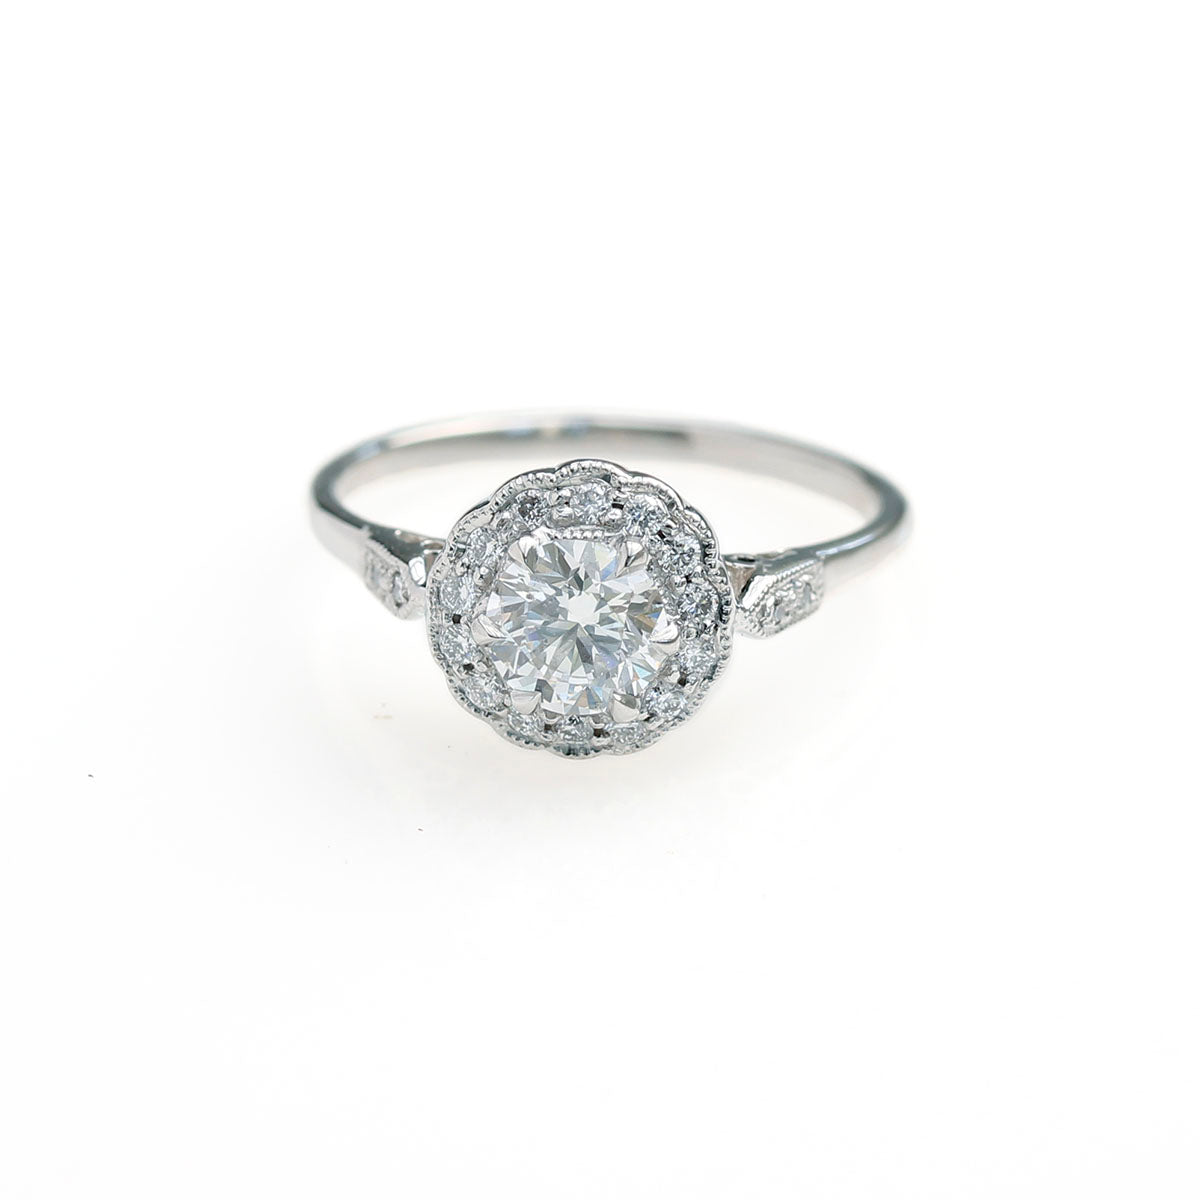 Vintage inspired Diamond Halo Engagement Ring #3306-10 - Leigh Jay & Co.